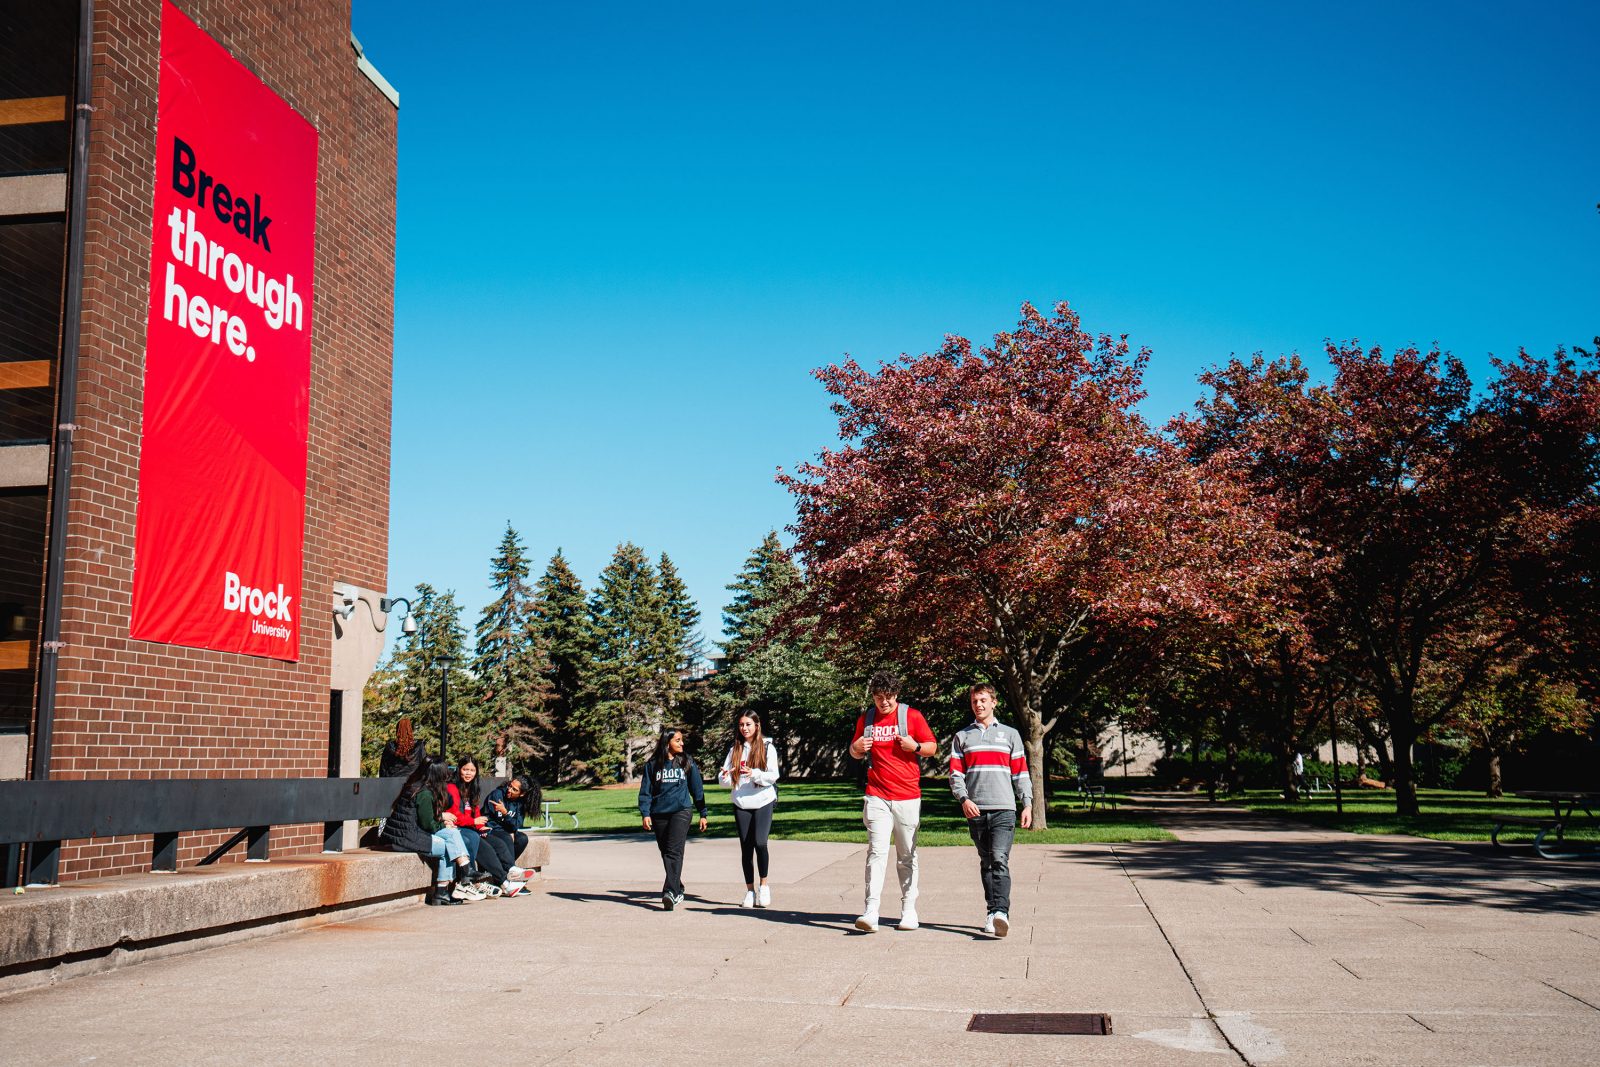 A group of students walk outside on a university campus with trees in the background and a large red banner on a brick building that reads 'Break through here.'